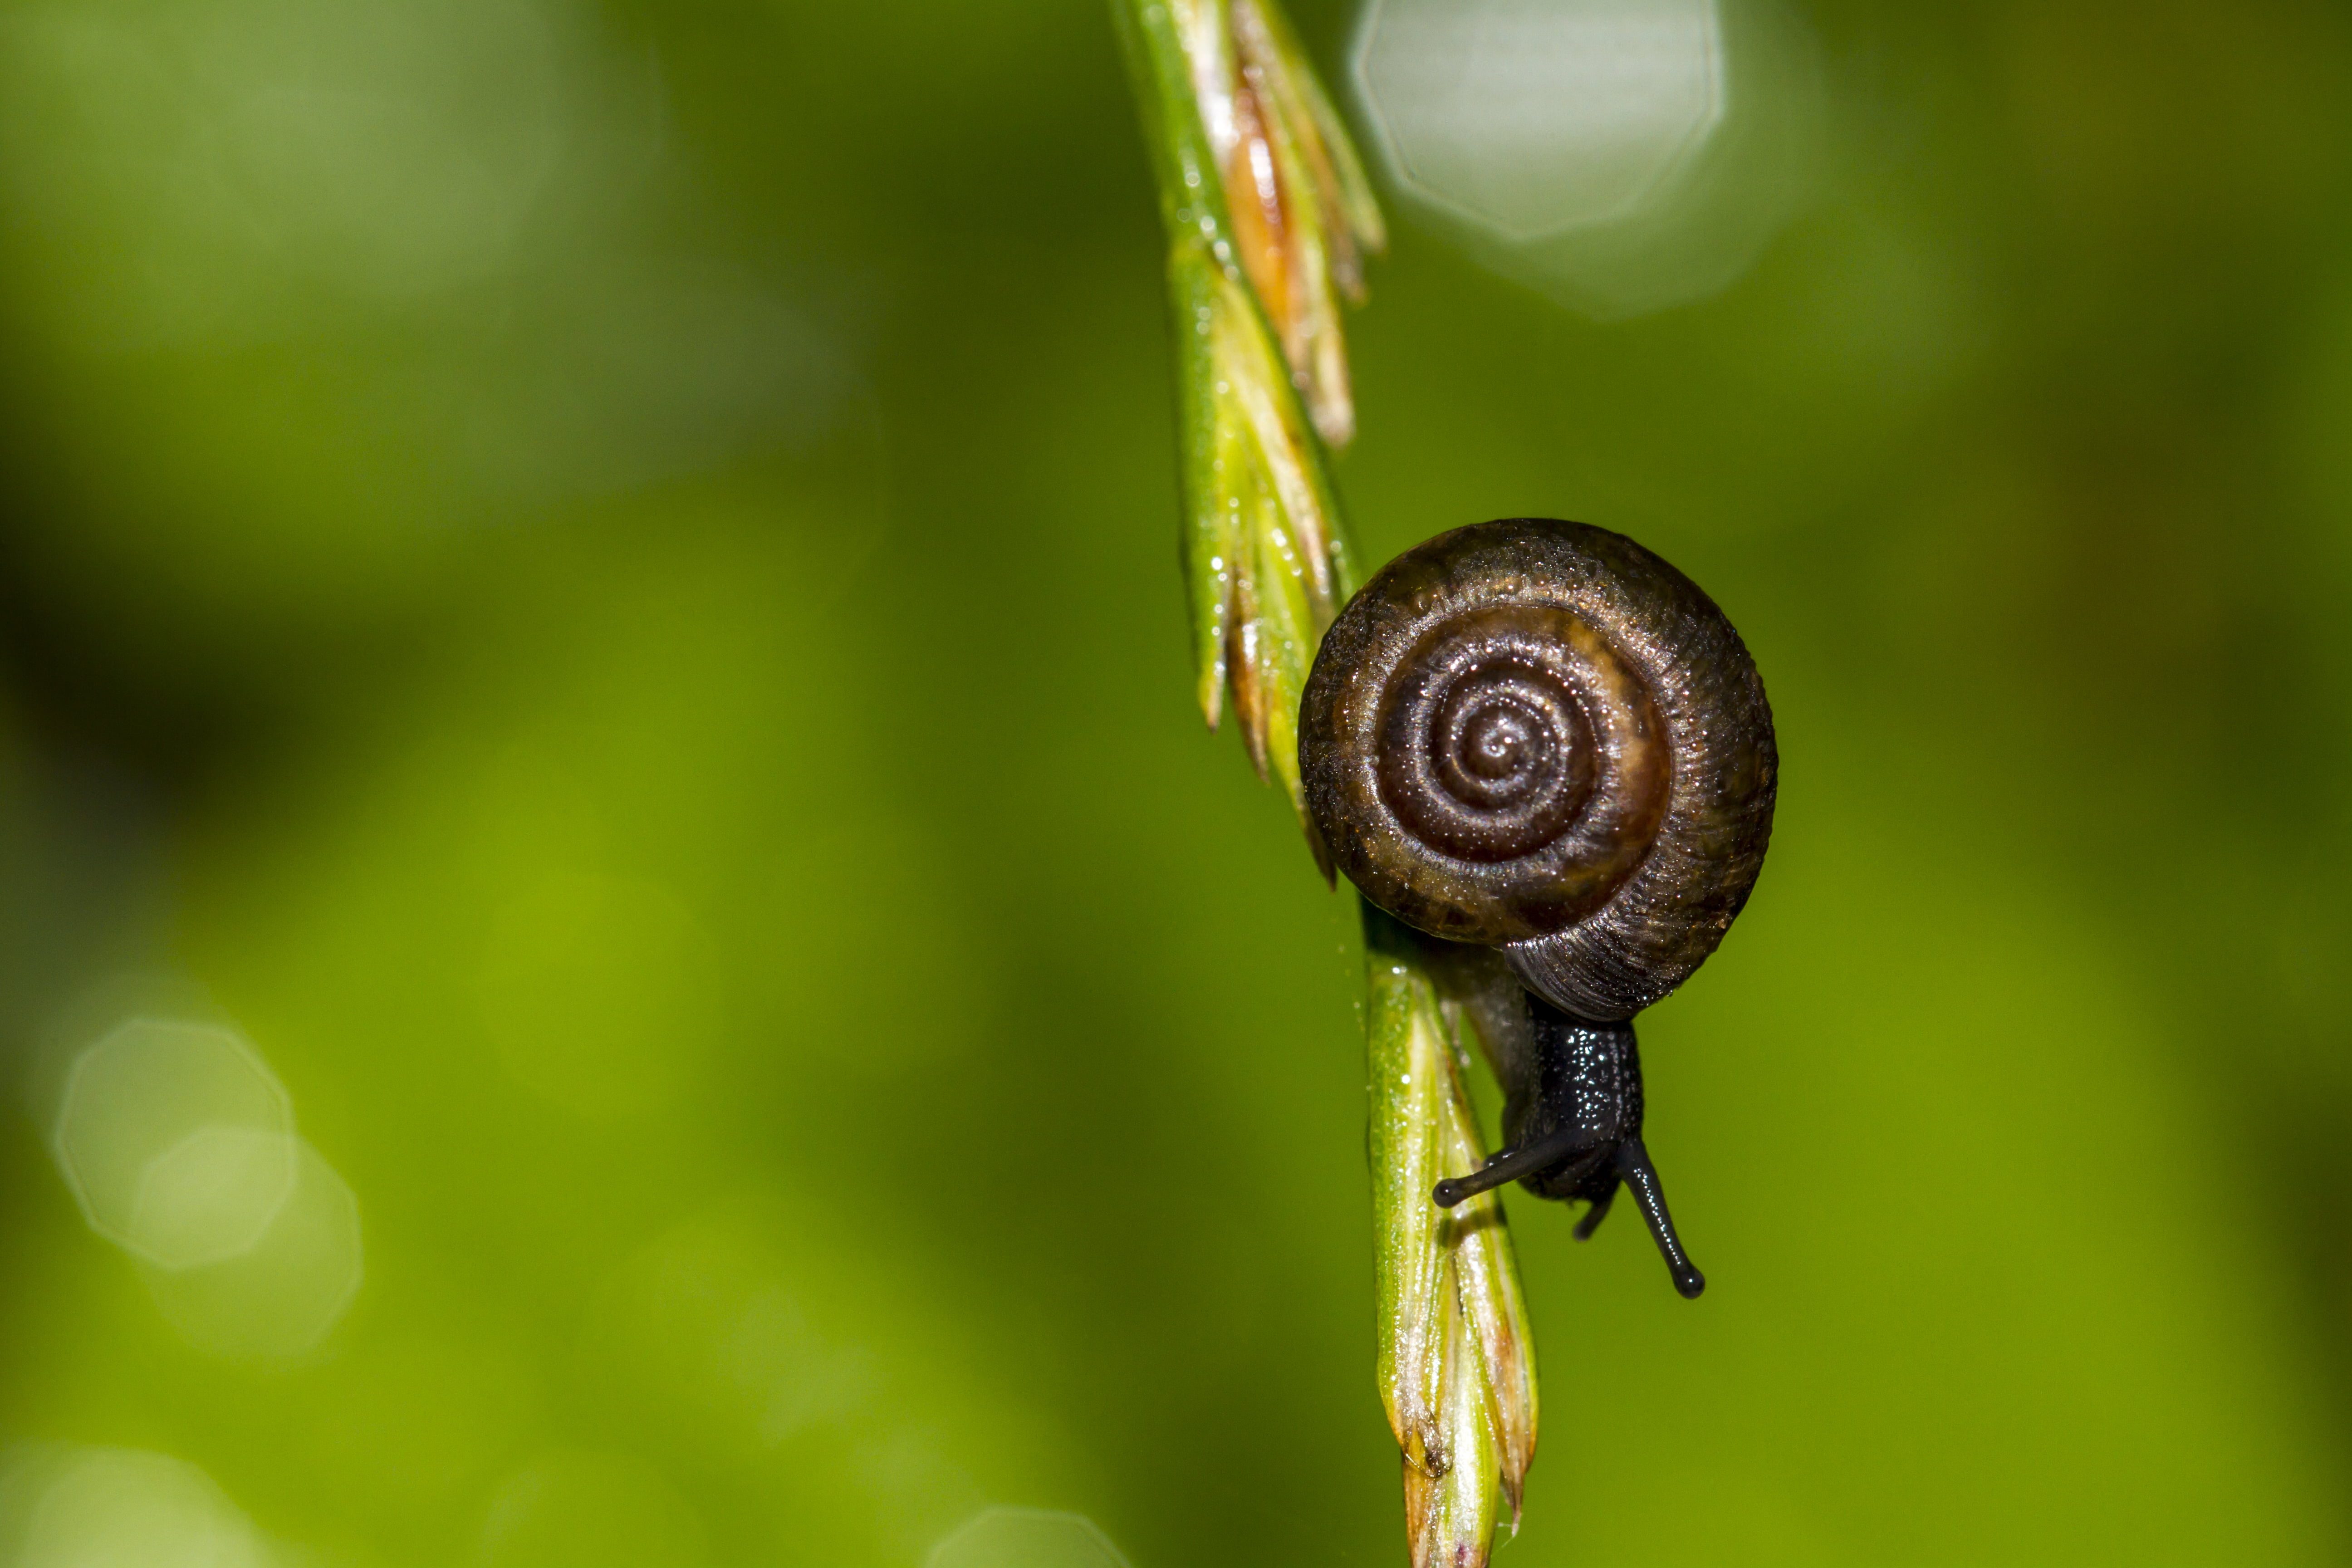 brown shelled snail on green twig, snail, Wishing, happy, Saturday